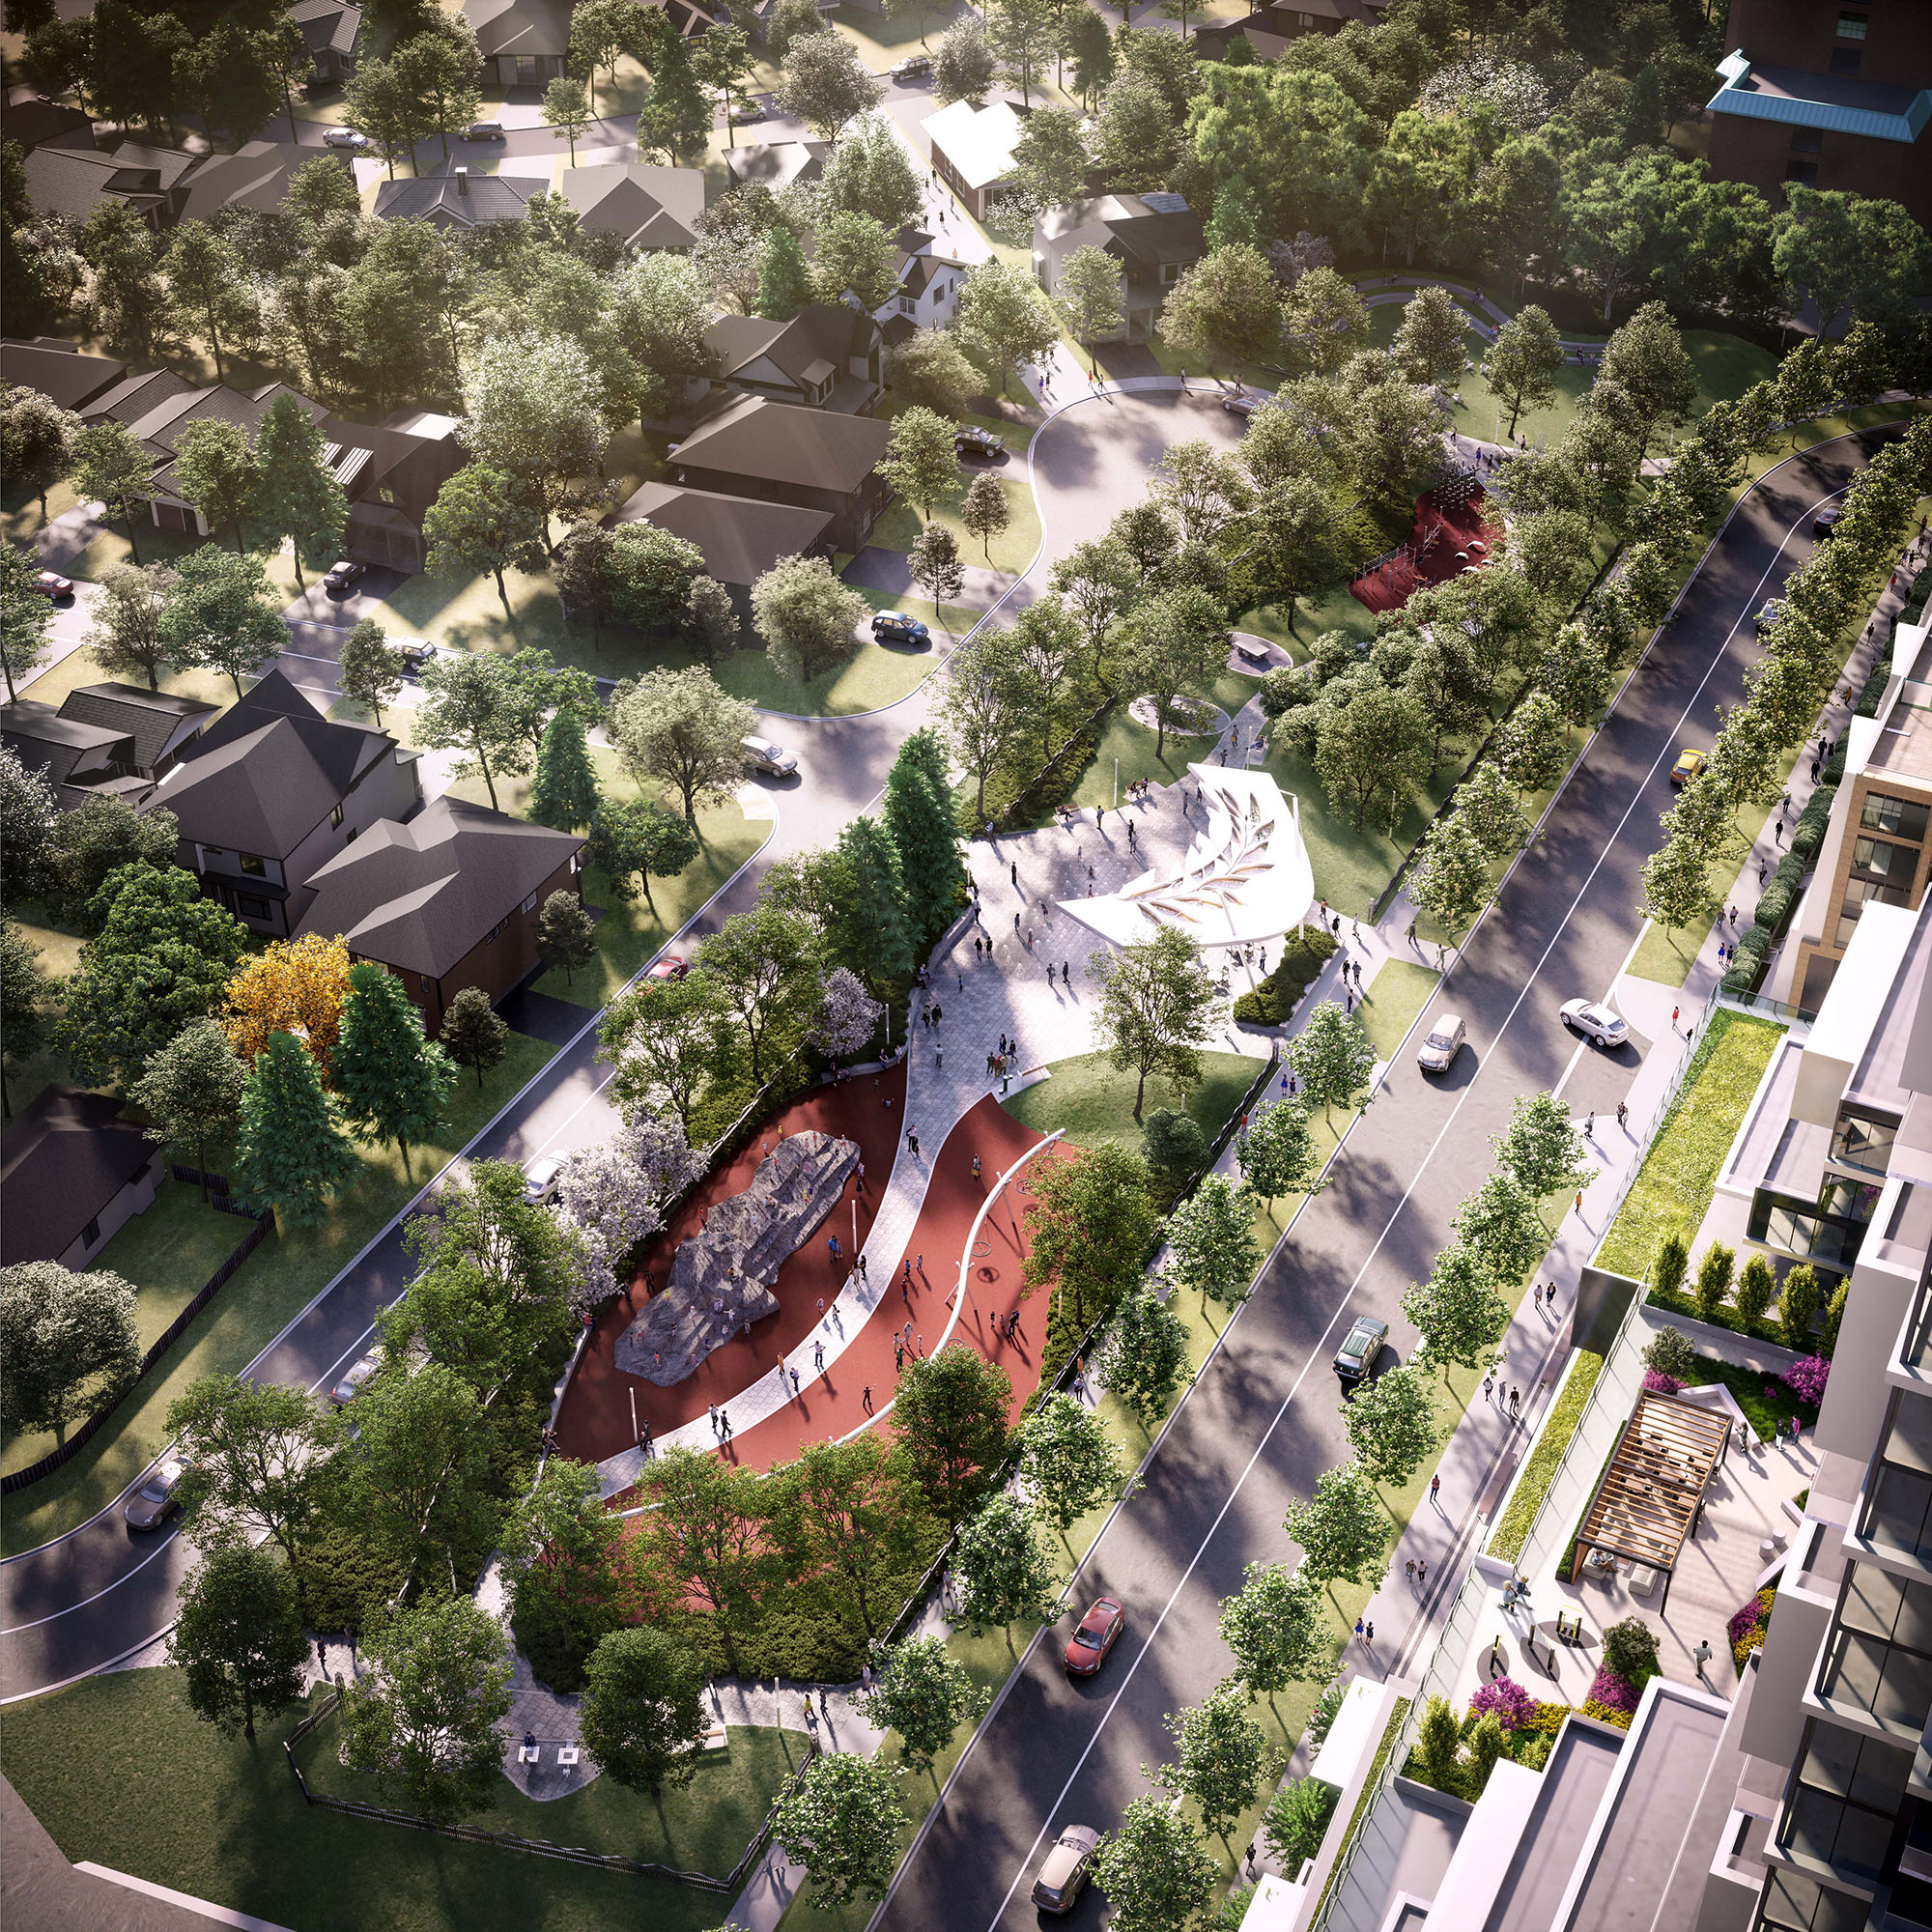 The image shows an aerial, artist rendering of the concept design, looking south towards Turnberry Crescent. To the right of the park is the new Olympic Garden Drive, with the new community centre and residential building on the far right.